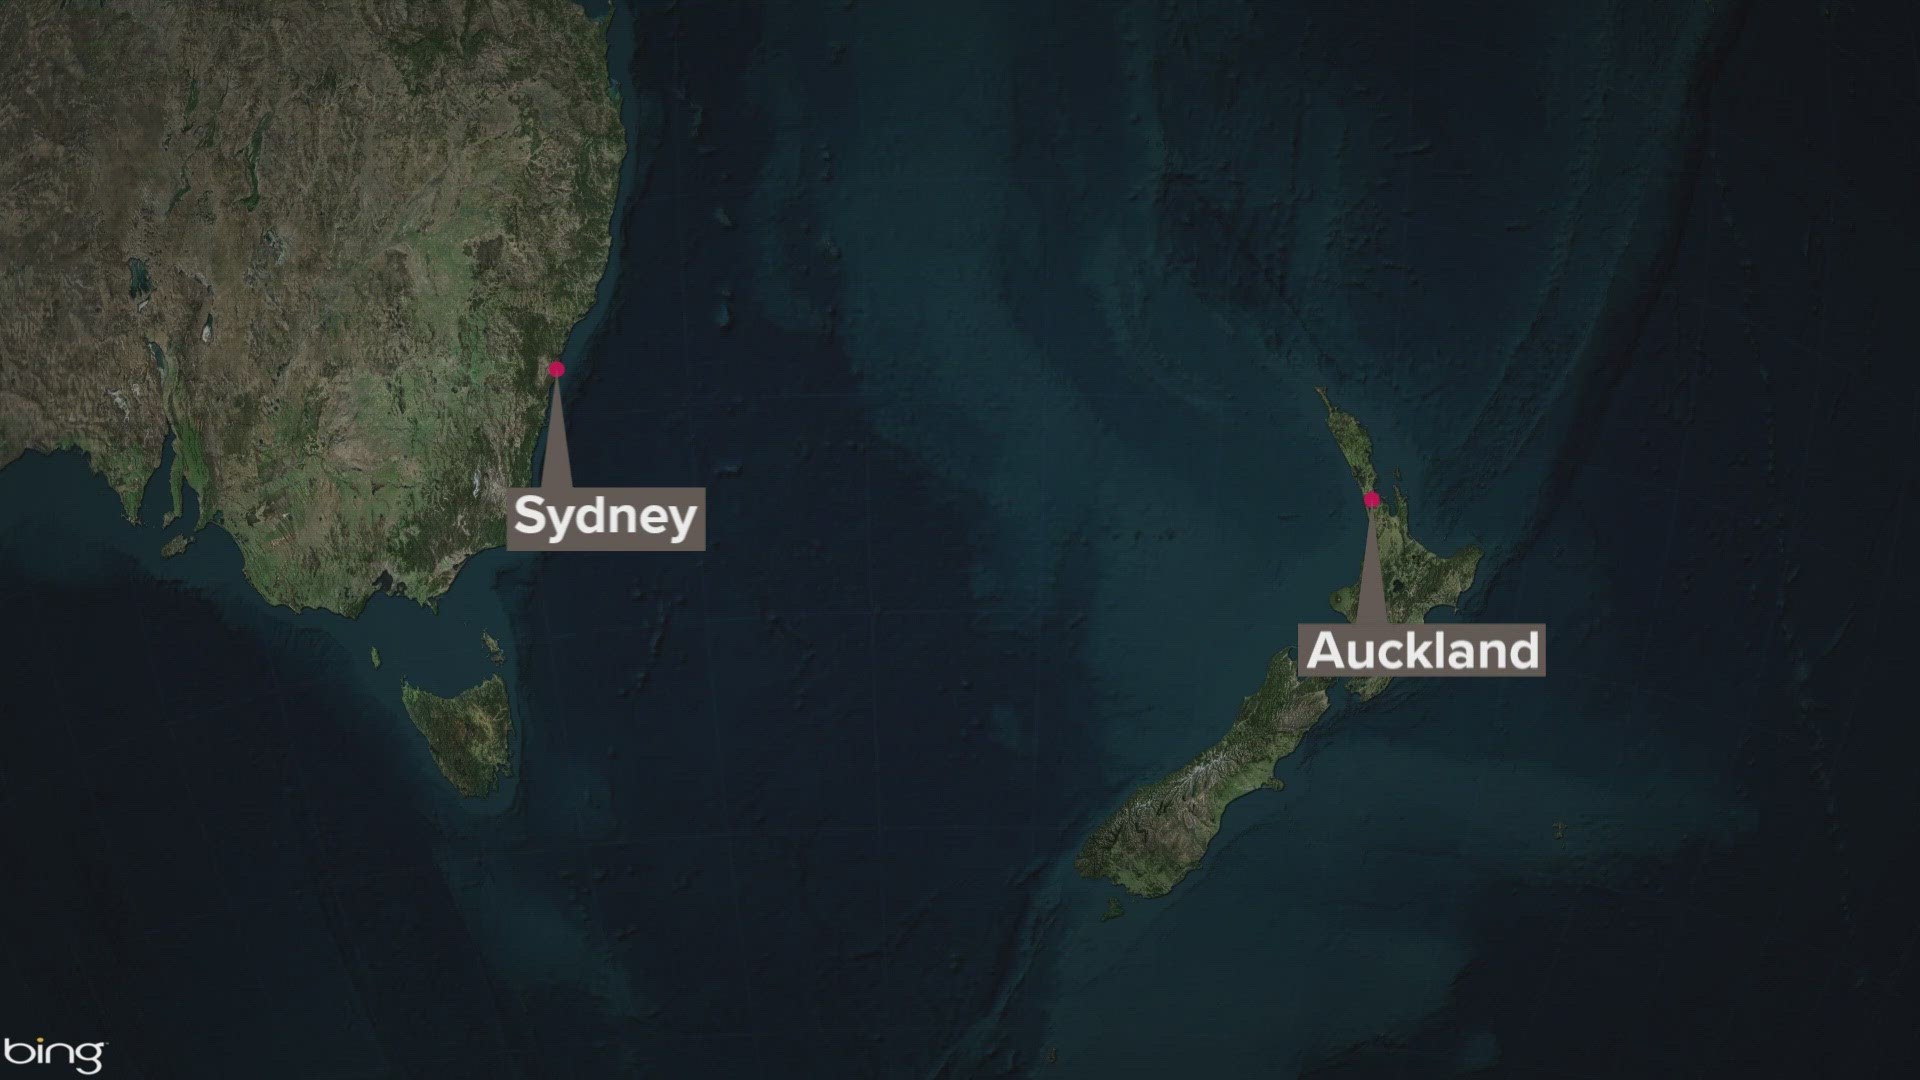 50 people were injured after a "strong movement" incident on a 787-9 Dreamliner flight from Syndey, Australia to Auckland, New Zealand